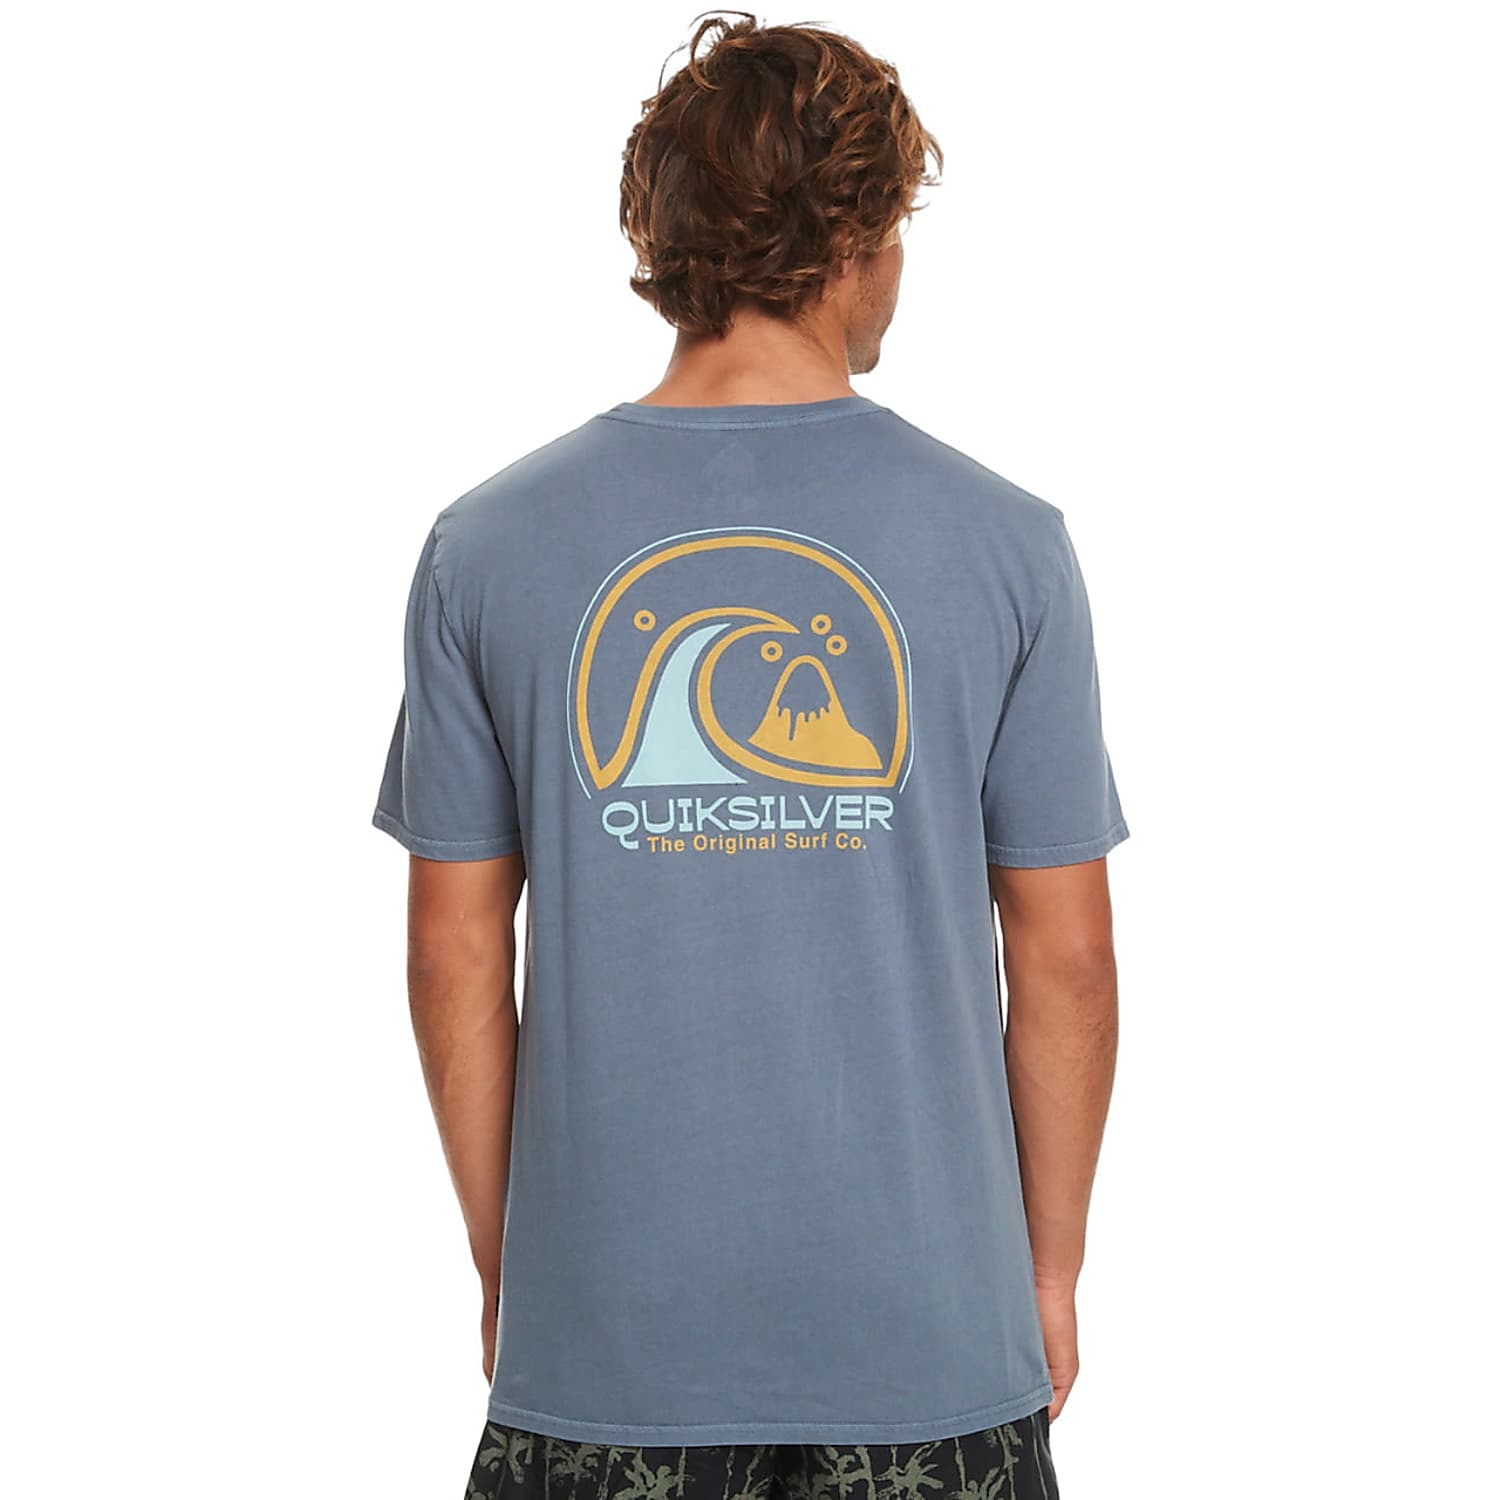 Quiksilver M Bering shipping CIRCLE - T-SHIRT, Sea CLEAN Fast cheap and